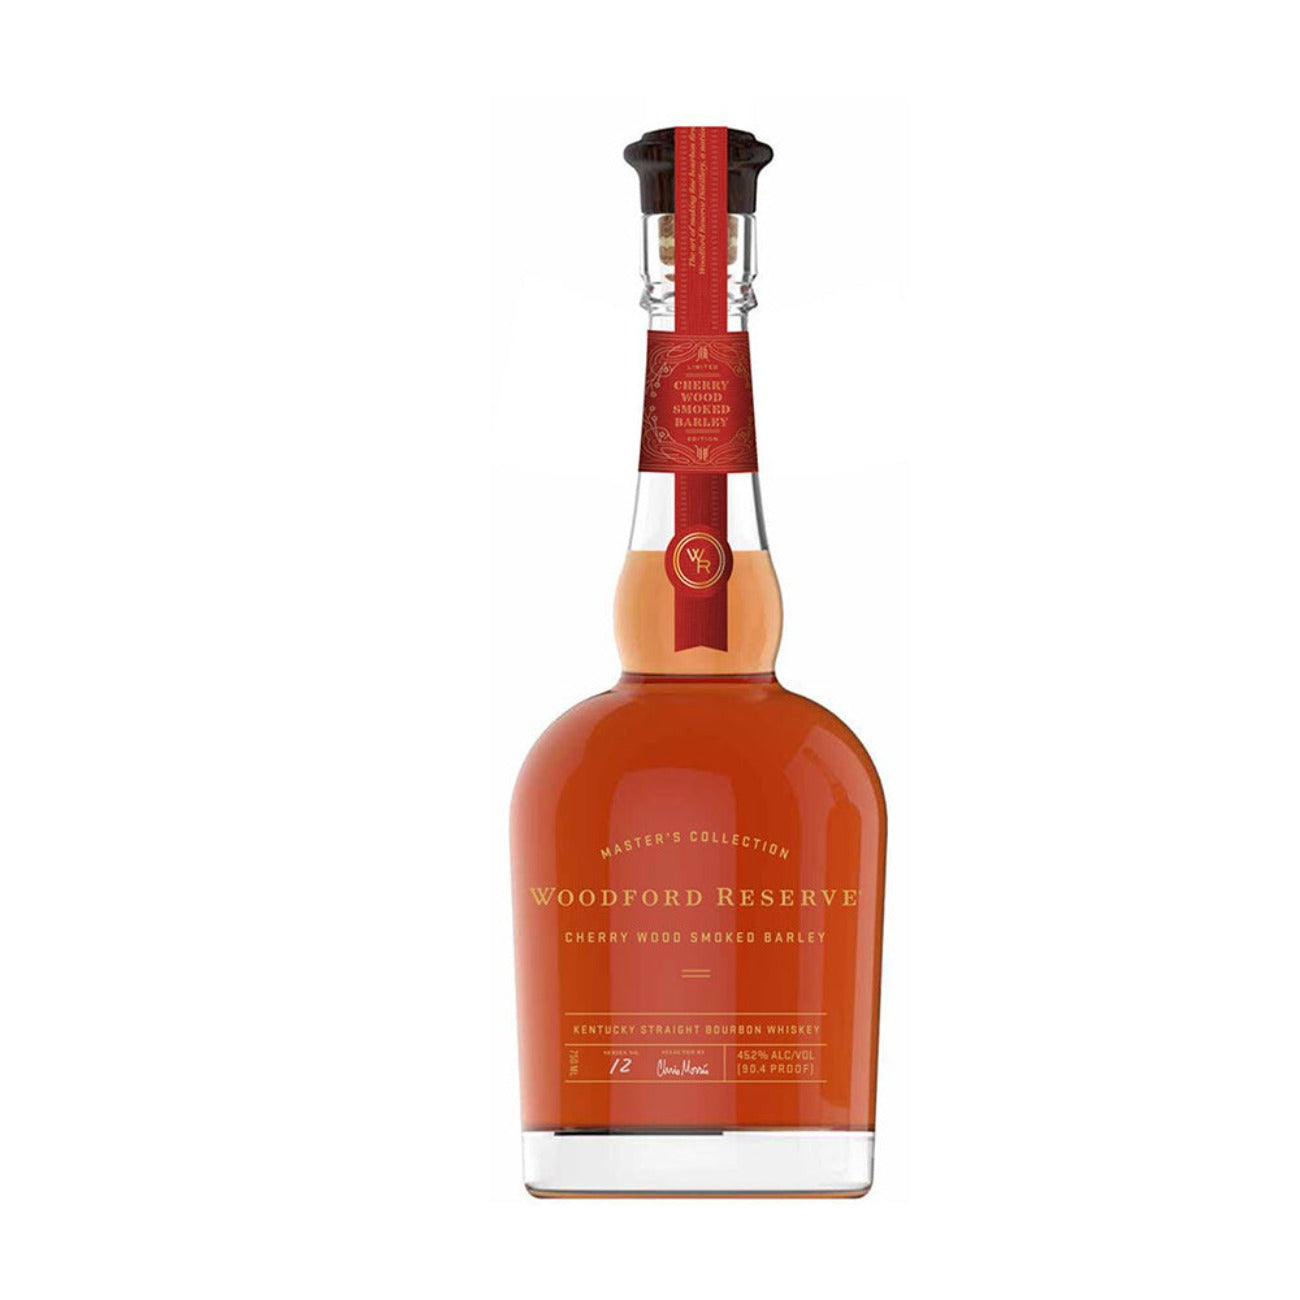 Woodford Reserve | Master’s Collection Cherry Wood Smoked Barley